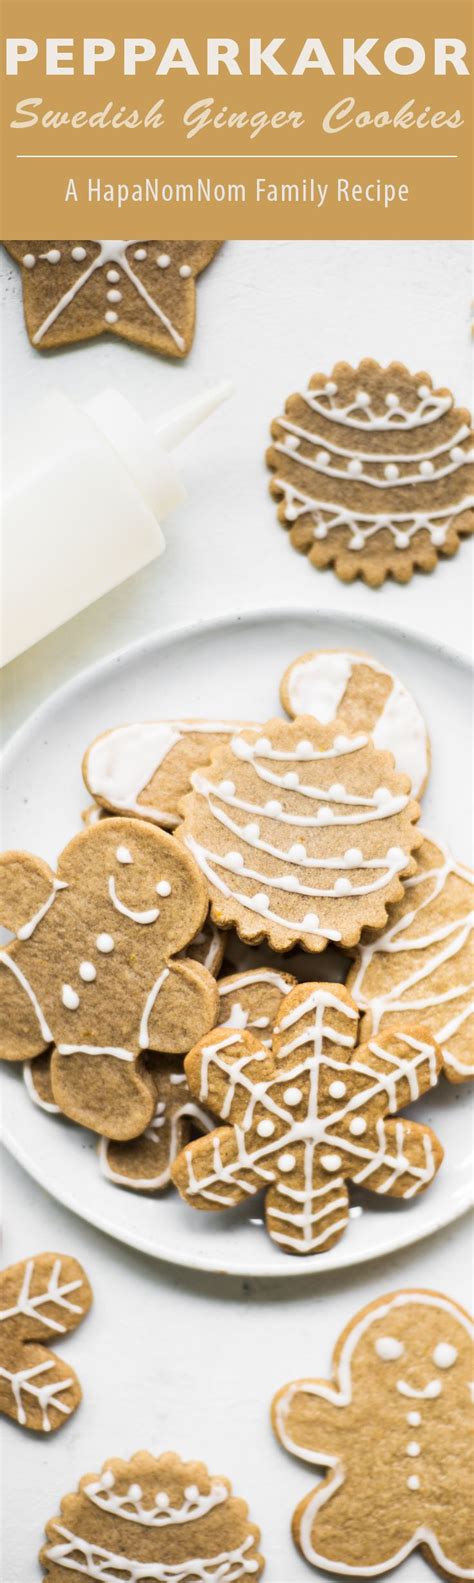 This link is to an external site that may or may not meet accessibility guidelines. Pepparkakor (Swedish Ginger Cookies) | Recipe | Ginger cookies, Favorite christmas recipes, Cookies